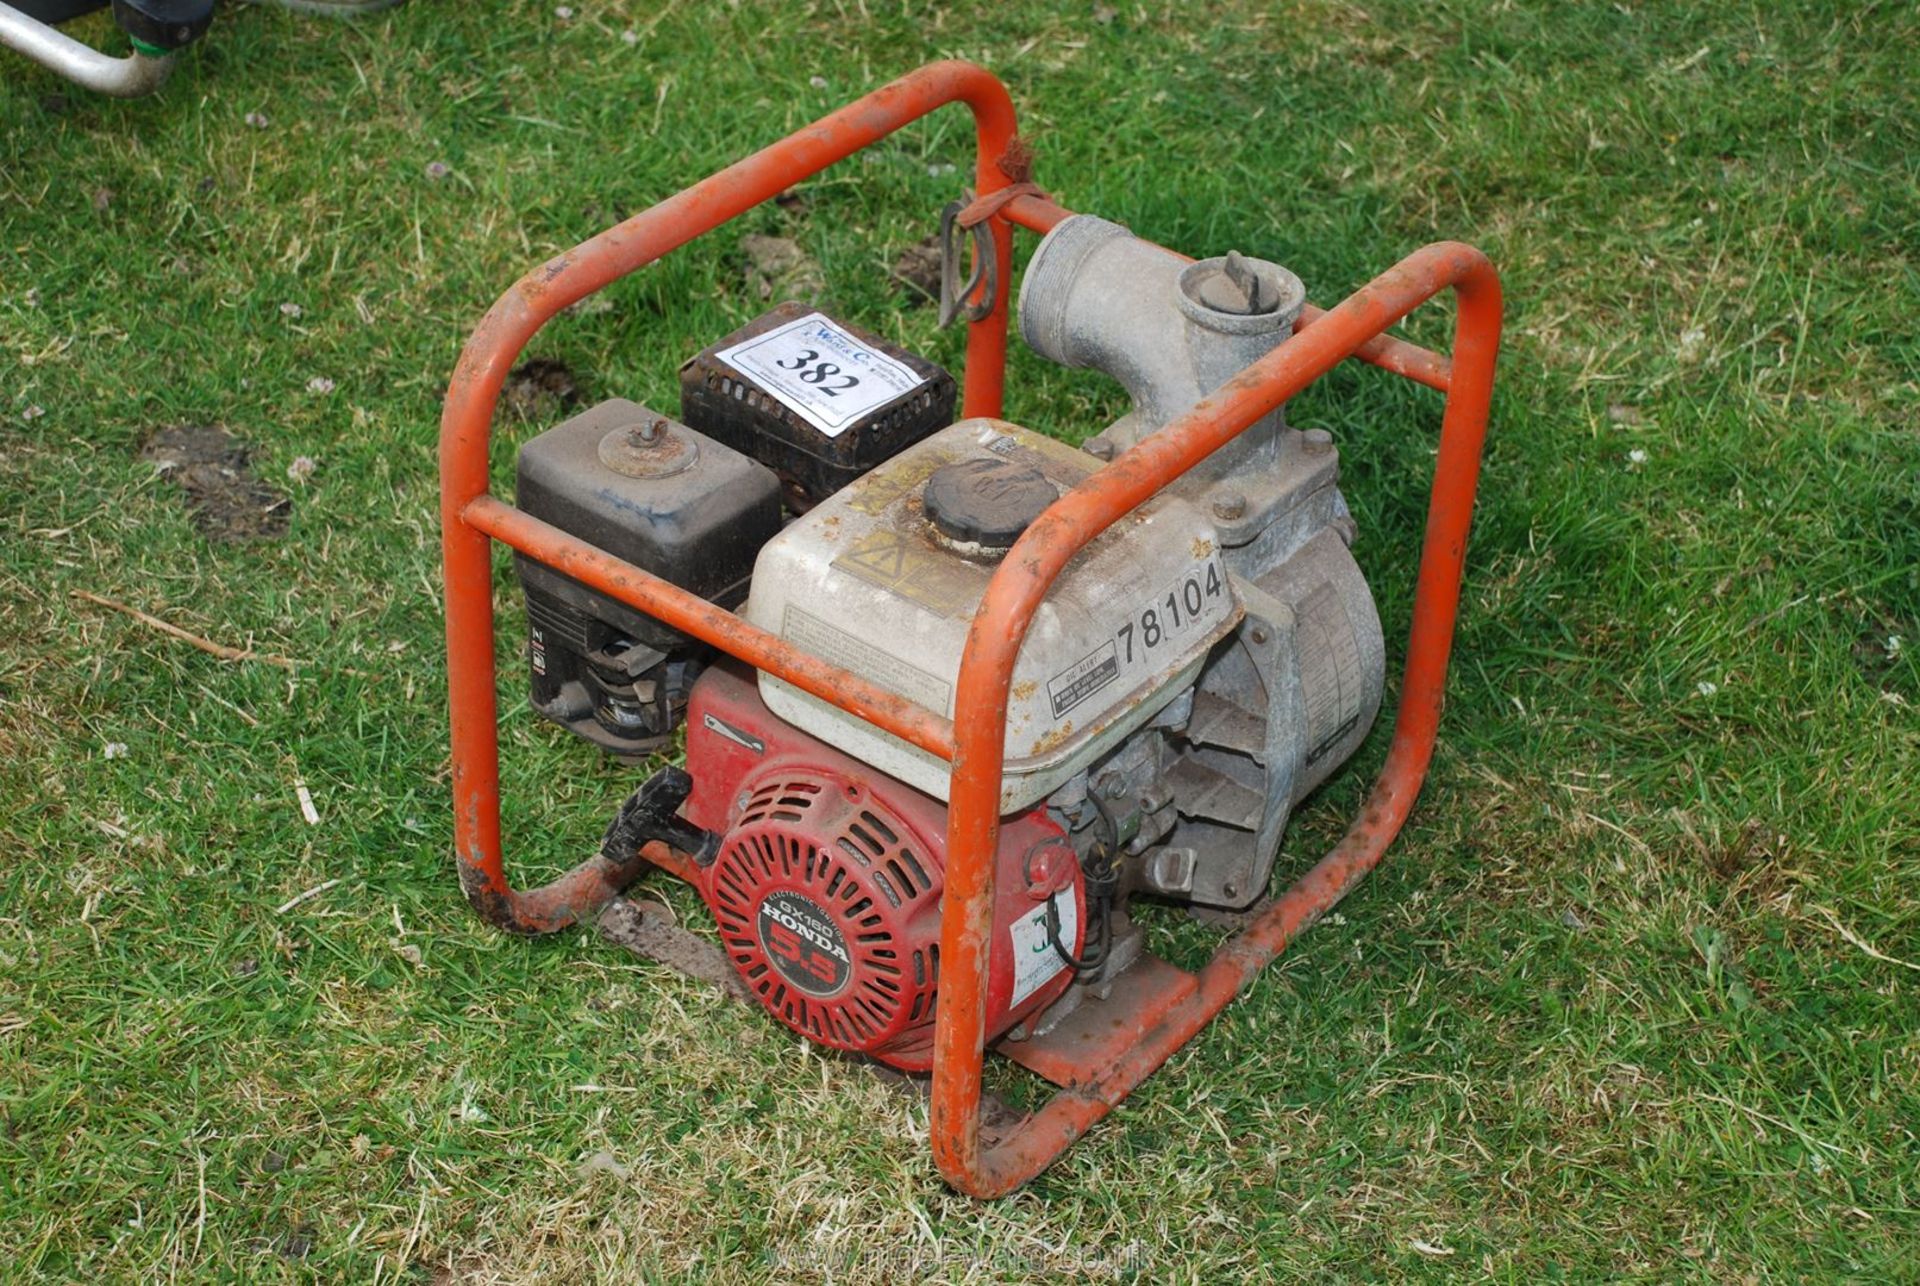 3'' water pump with 5.5 hp Honda engine, good compression, (unable to start, no fuel present).